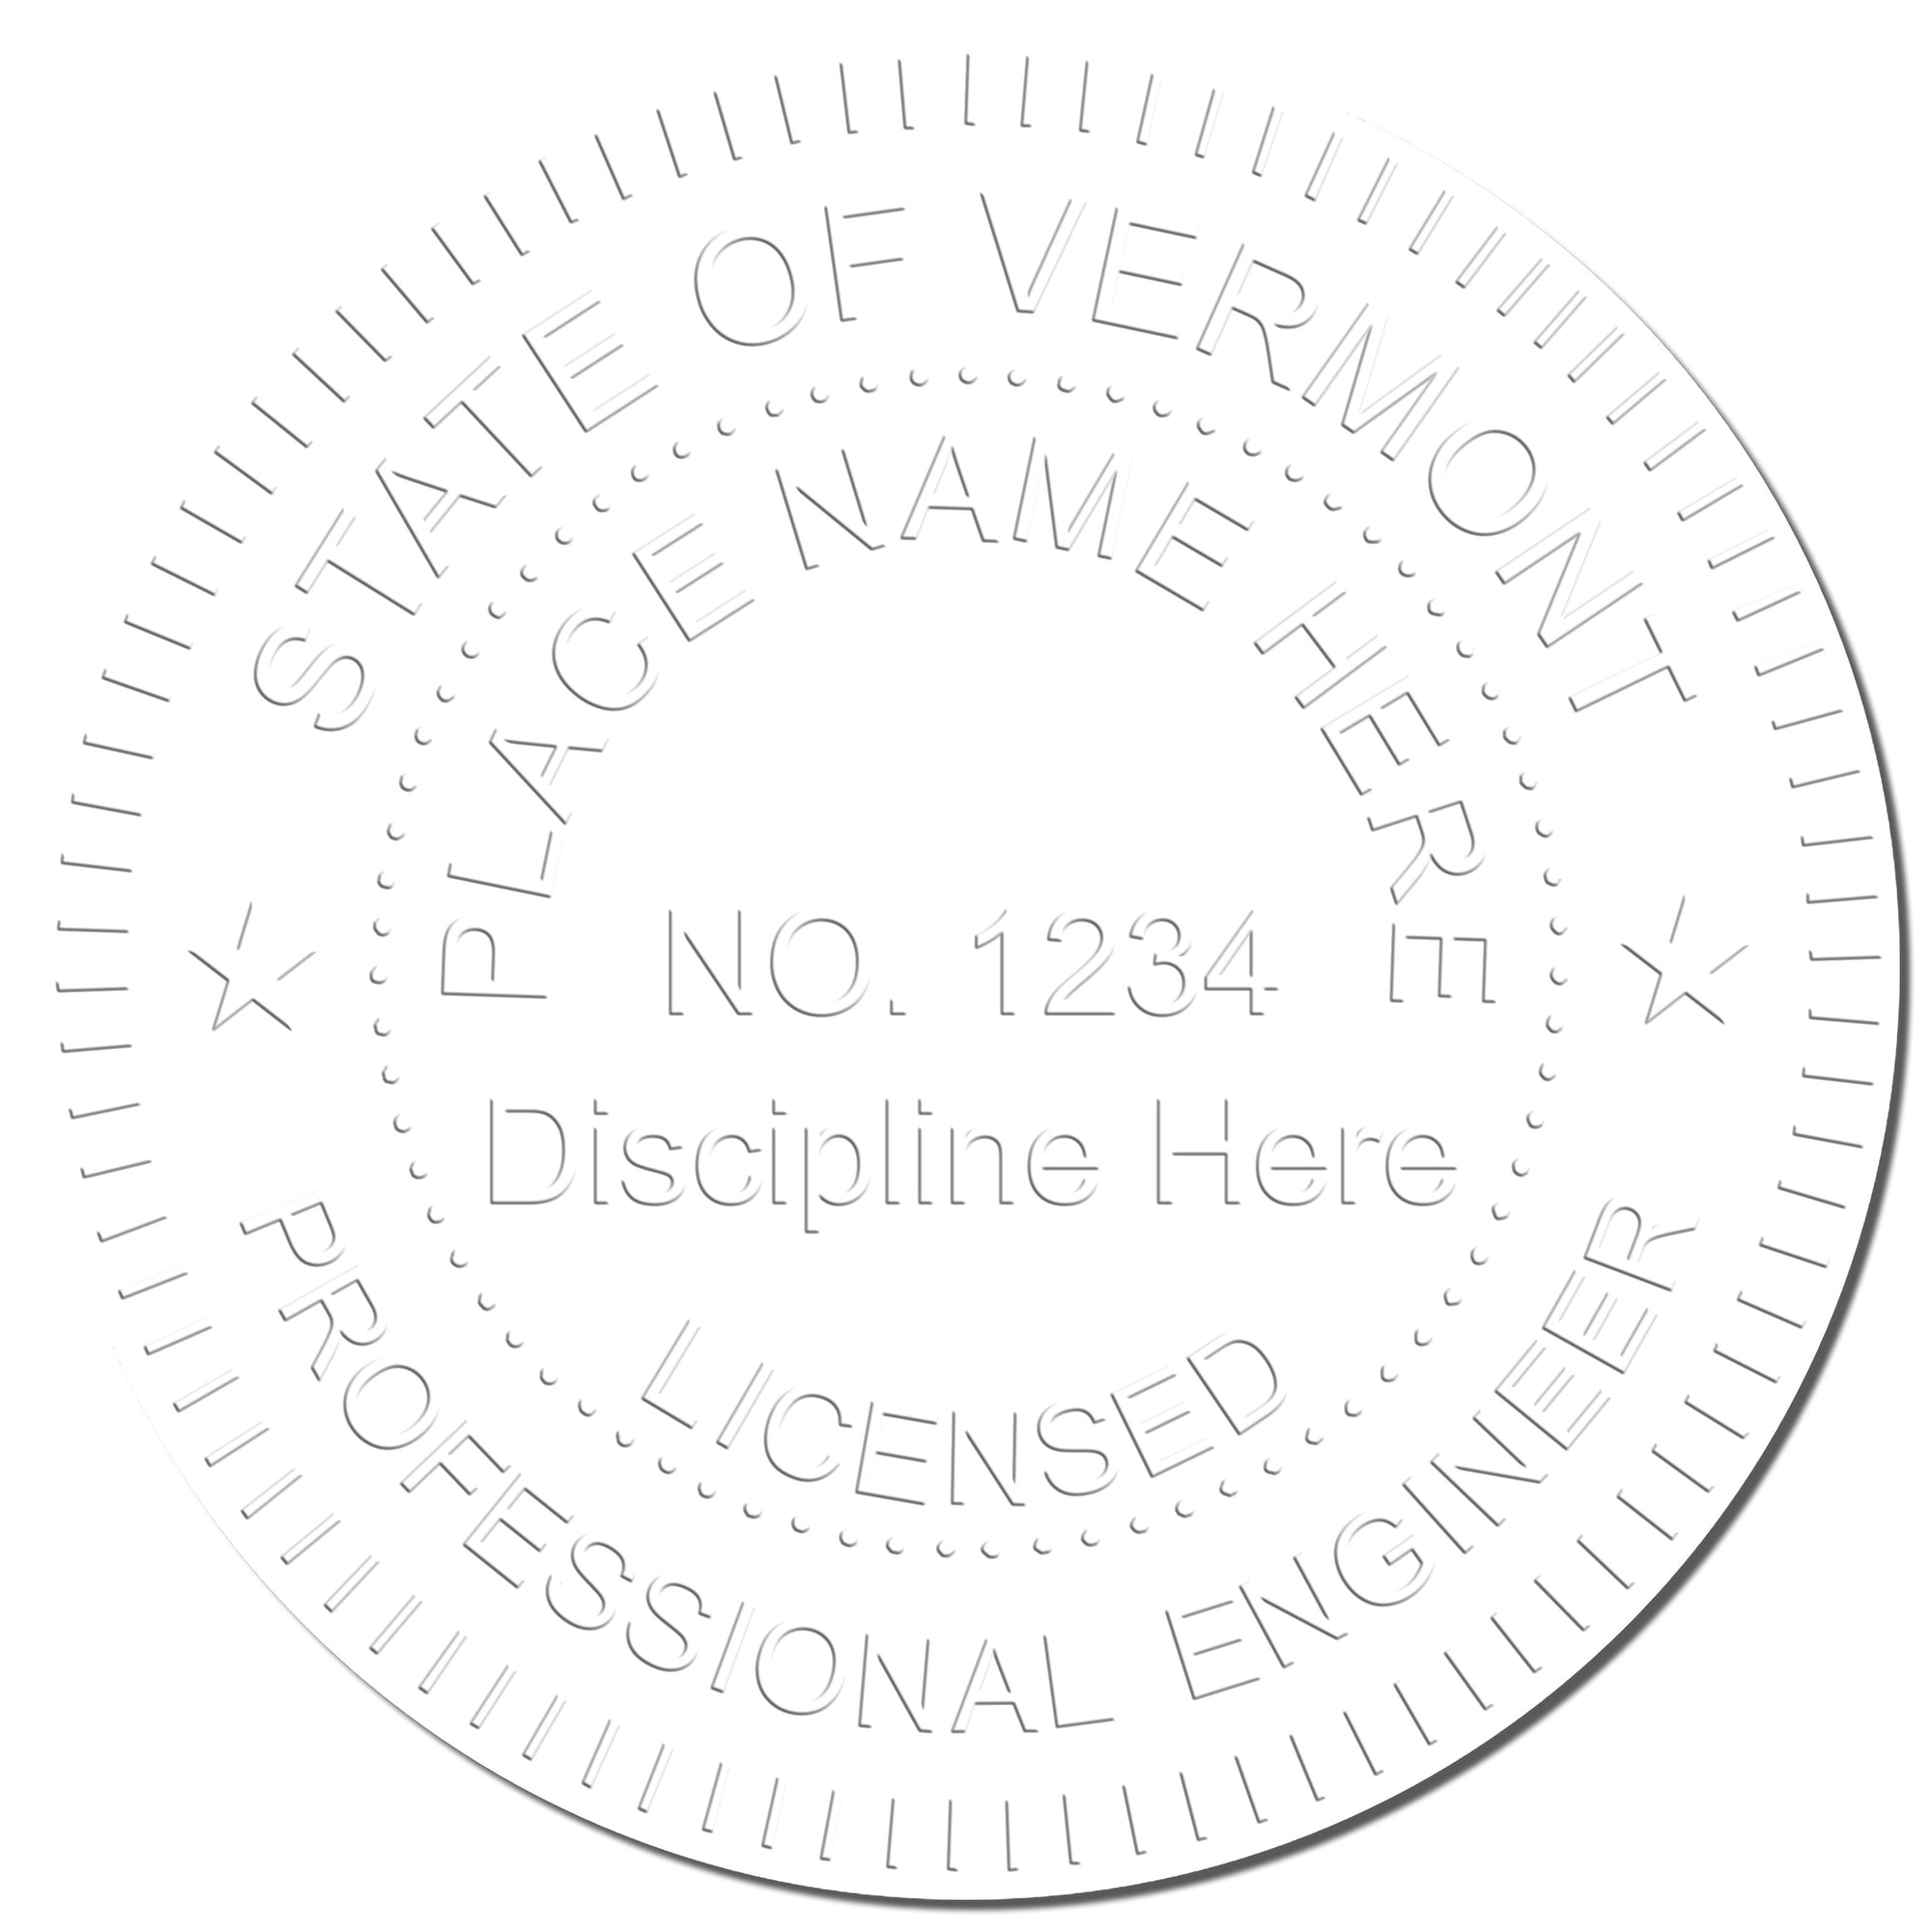 The main image for the Vermont Engineer Desk Seal depicting a sample of the imprint and electronic files